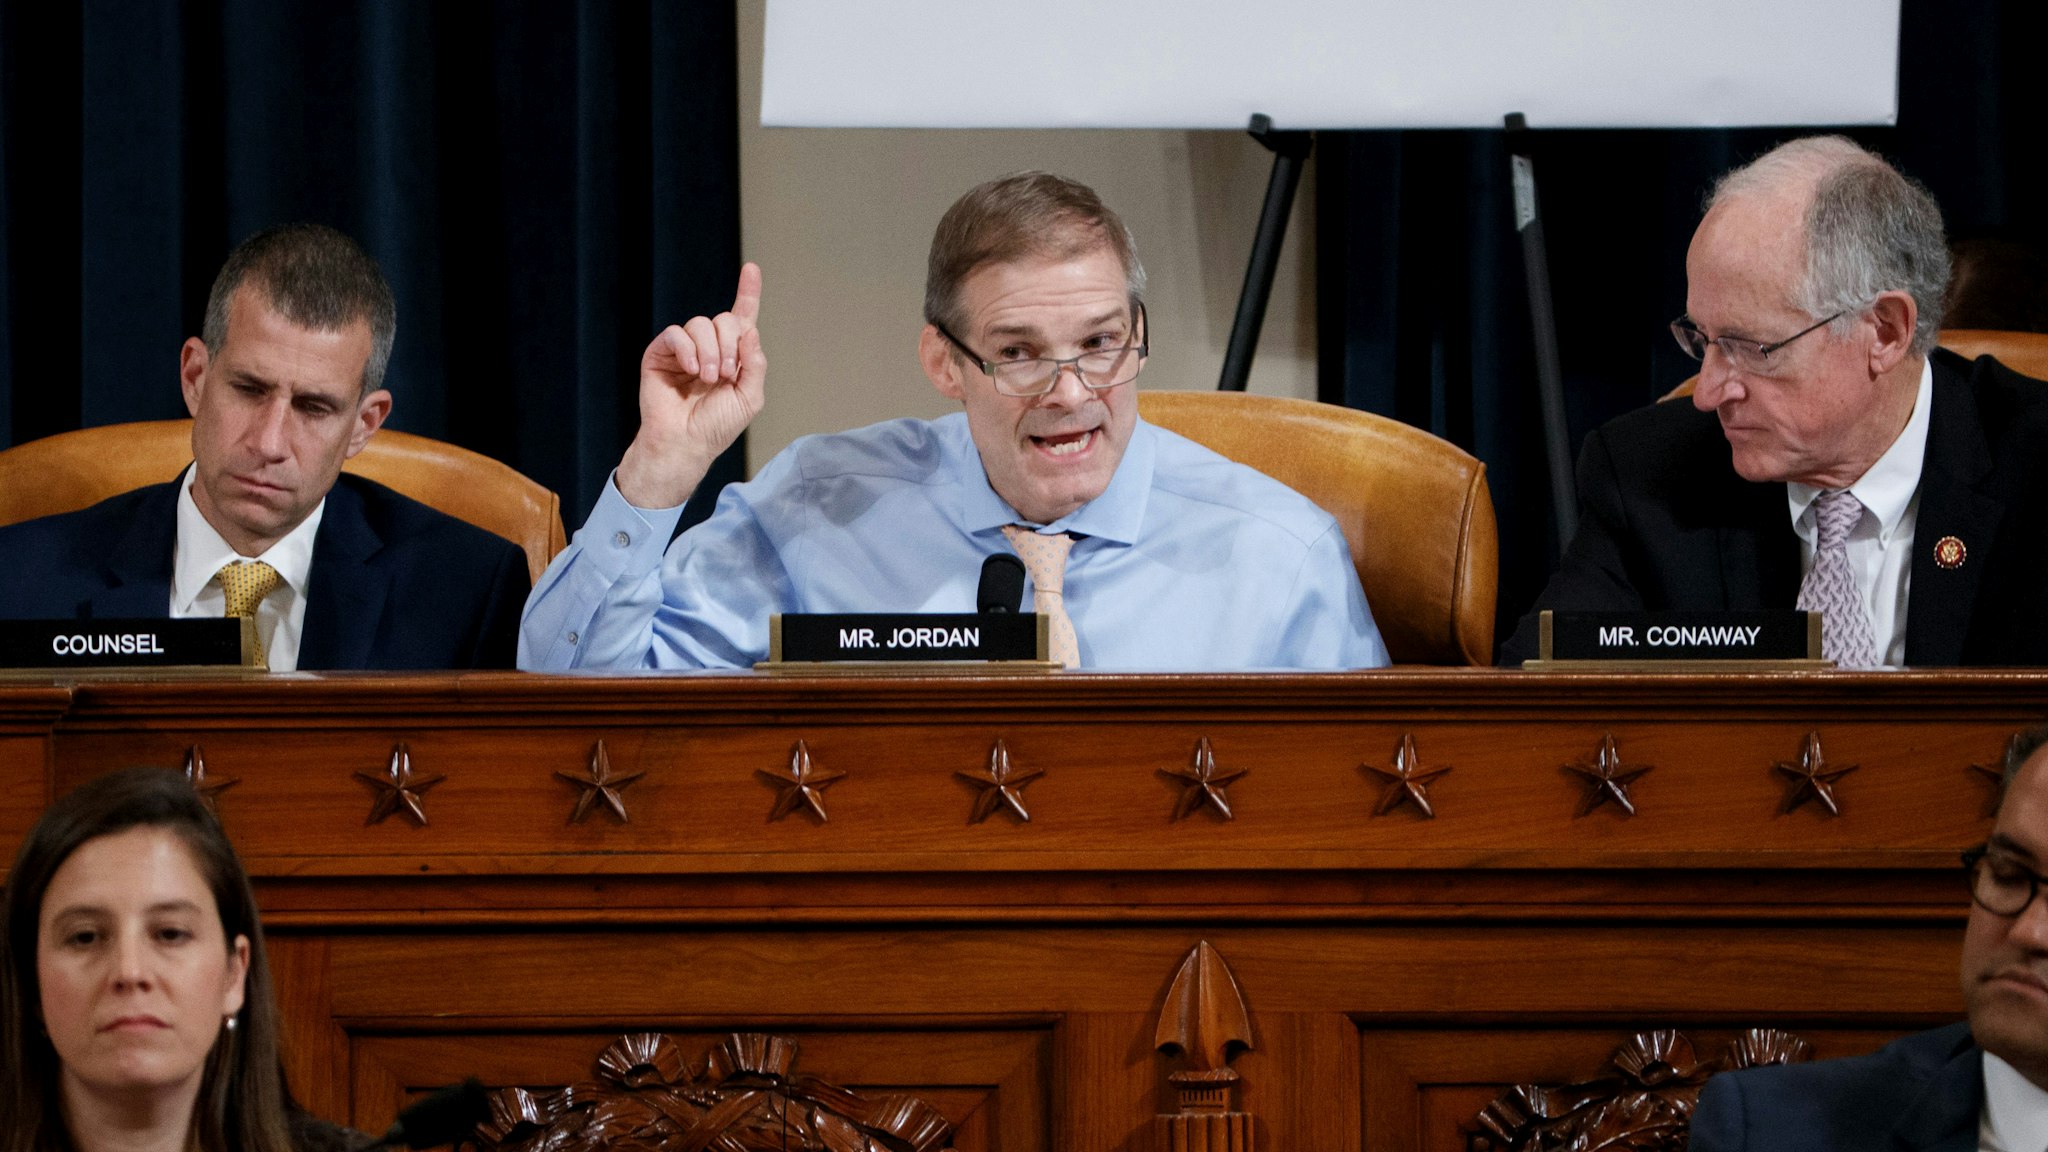 Republican Representative from Ohio Jim Jordan questions Special Advisor for Europe and Russia in the office of US Vice President Mike Pence, Jennifer Williams and Director for European Affairs of the National Security Council, US Army Lieutenant Colonel Alexander Vindman during the House Permanent Select Committee on Intelligence public hearing on the impeachment inquiry into US President Donald Trump, on Capitol Hill in Washington,DC on November 19, 2019.